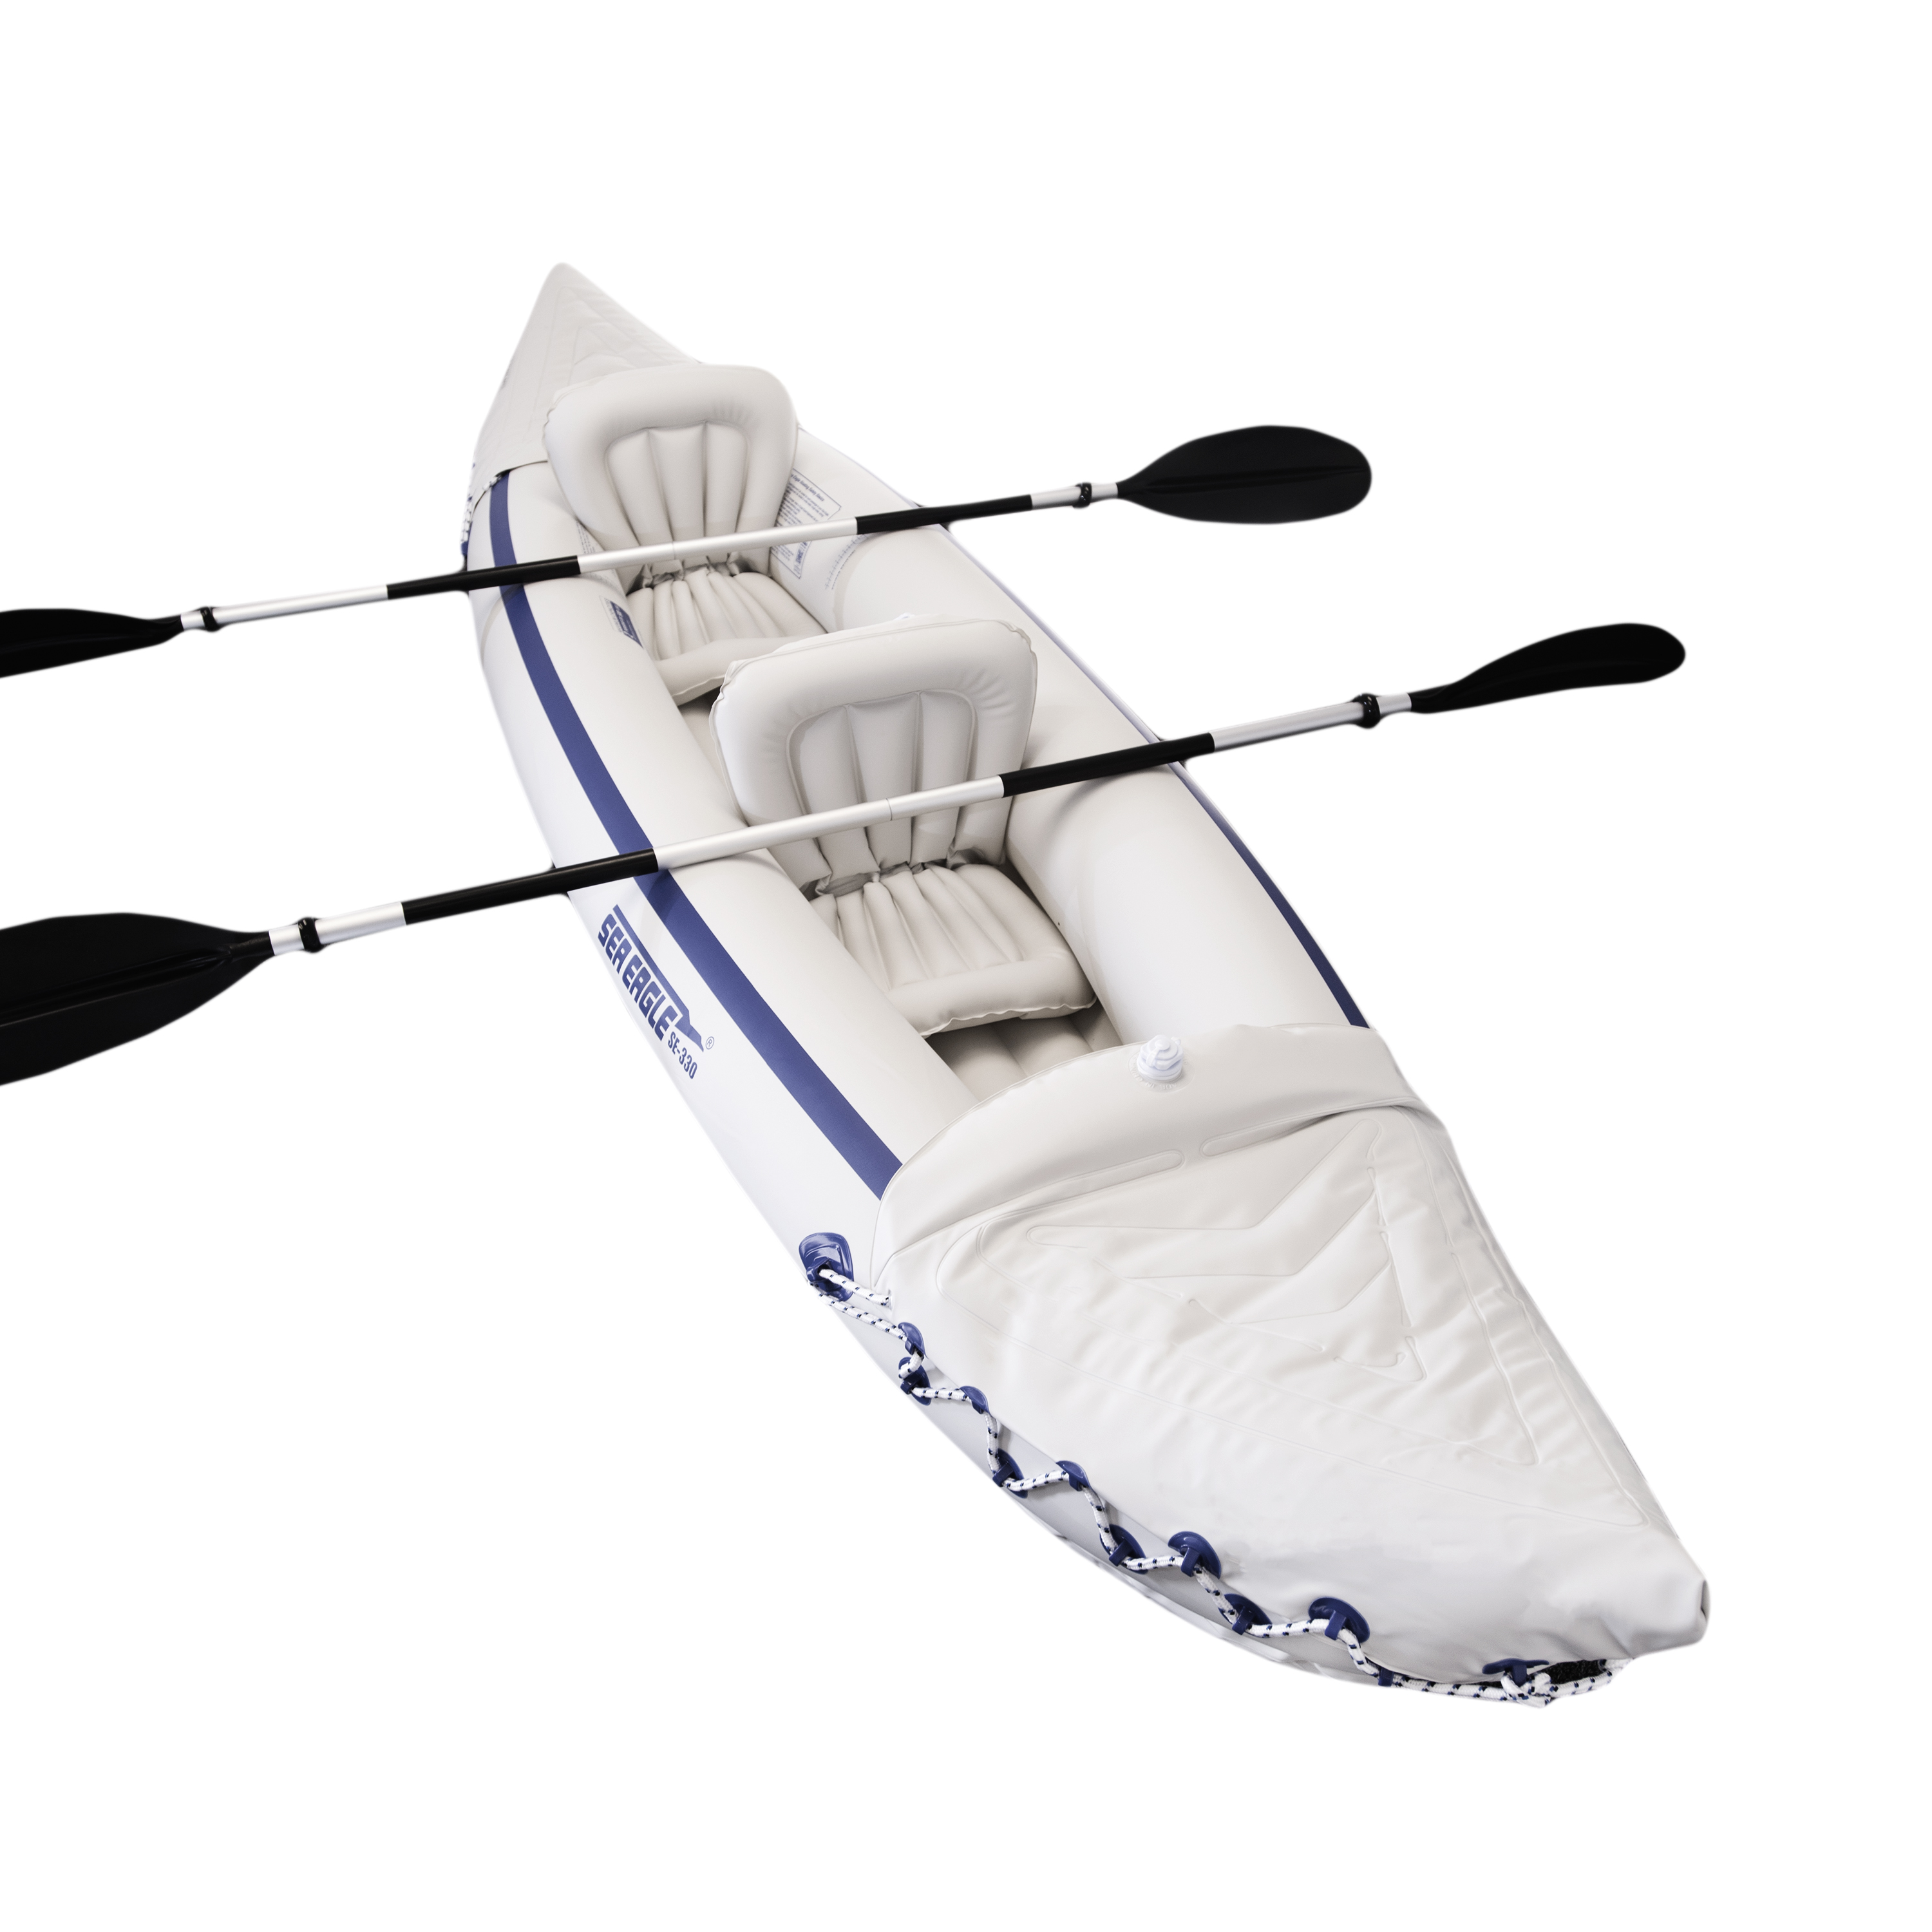 Sea Eagle 330 Start-Up 2 Person Inflatable Kayak with Paddles - image 1 of 8